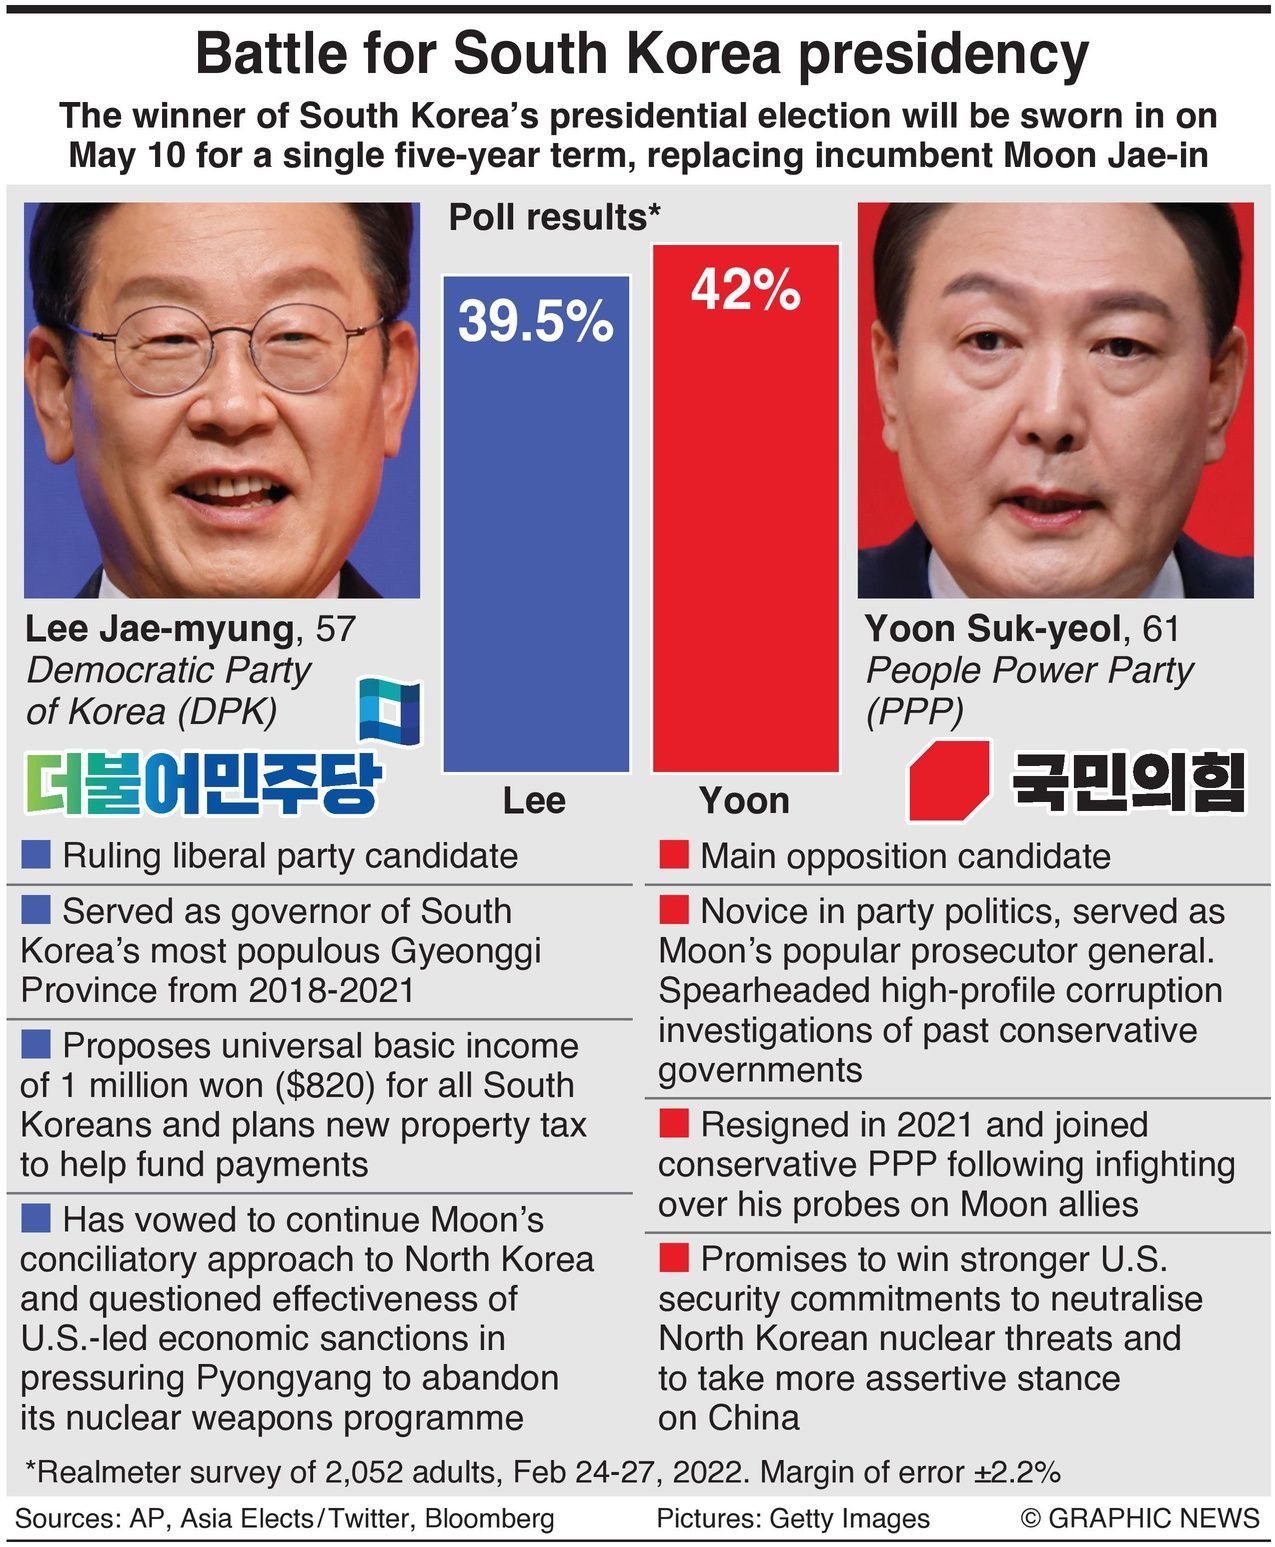 Soth Korean Presidential Candidates Lee Jae-myung (Democratic party of Korea) and Yoon Suk-yeol (People Power Party)